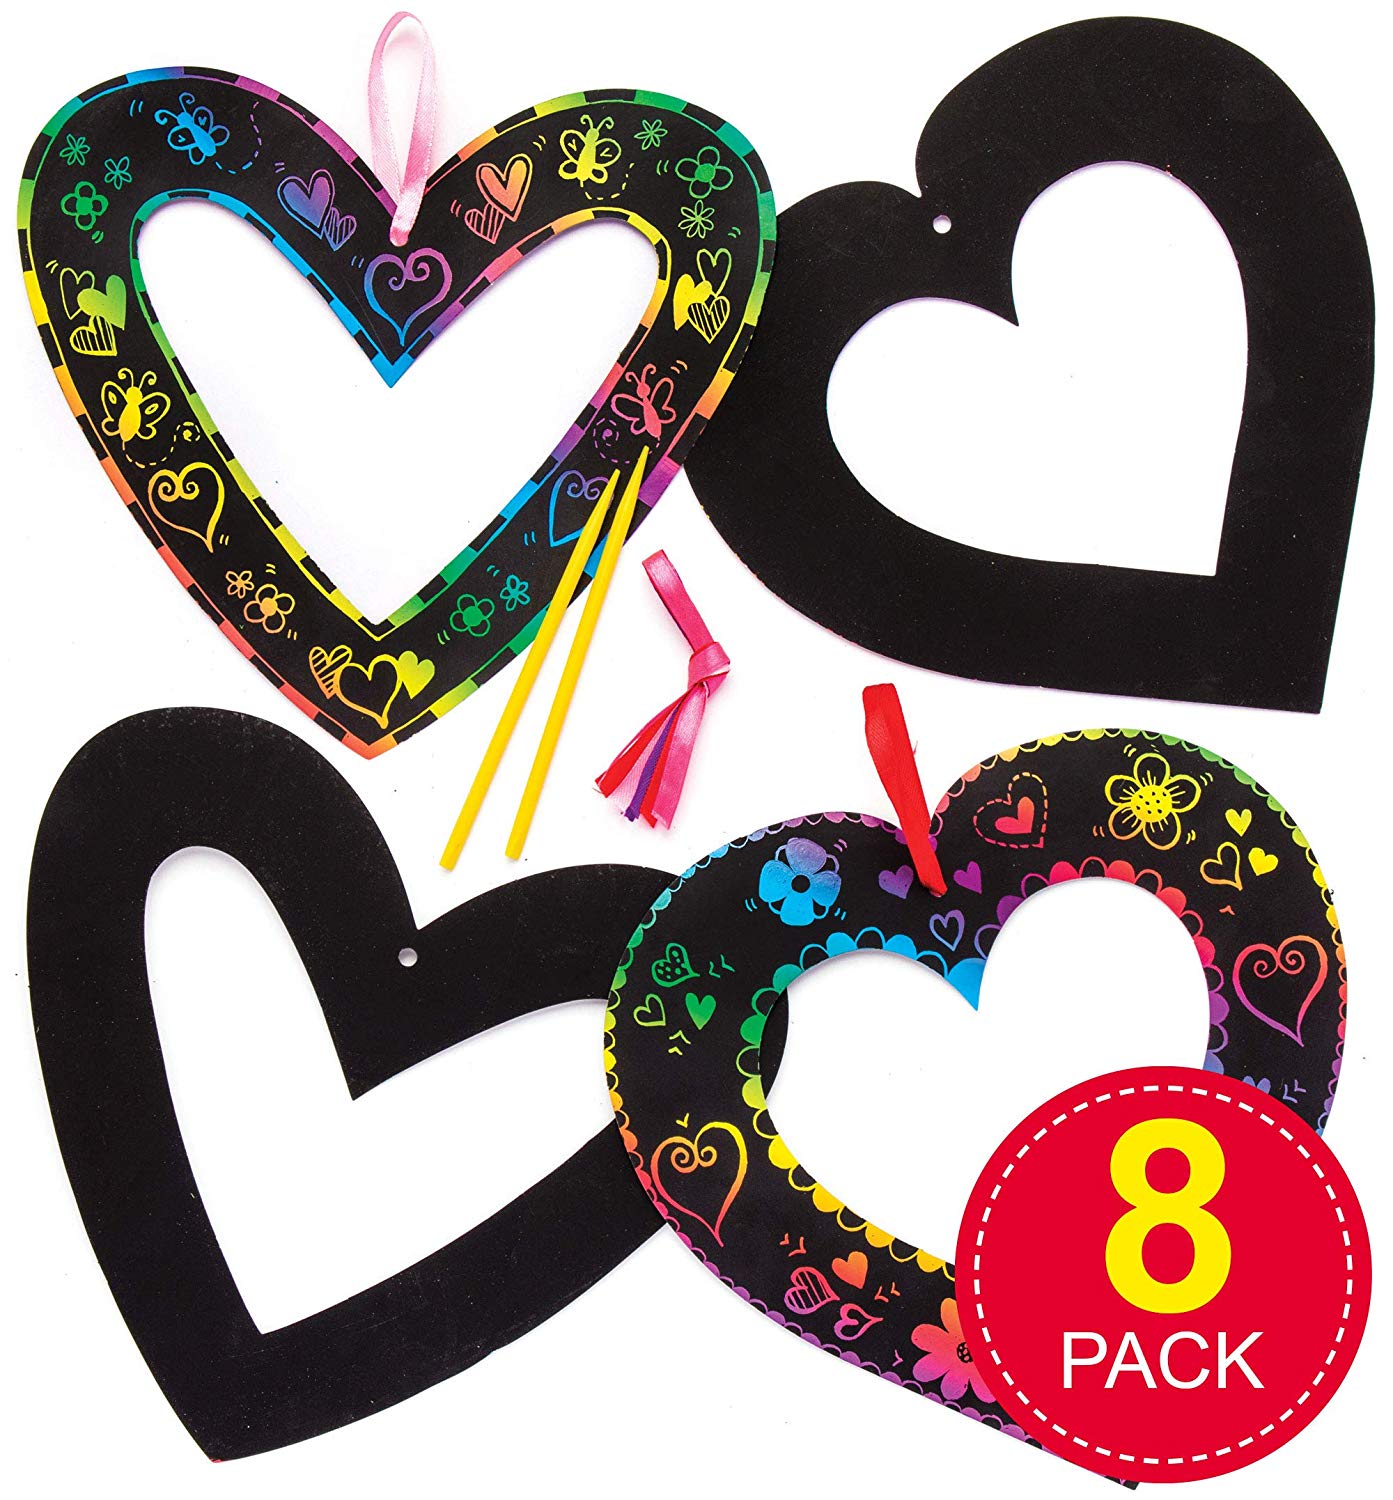 Decorate with Love Especially Lovely for Mothers Day or Valentines Baker Ross Childrens Craft Heart Shaped Boxes Pack of 8 